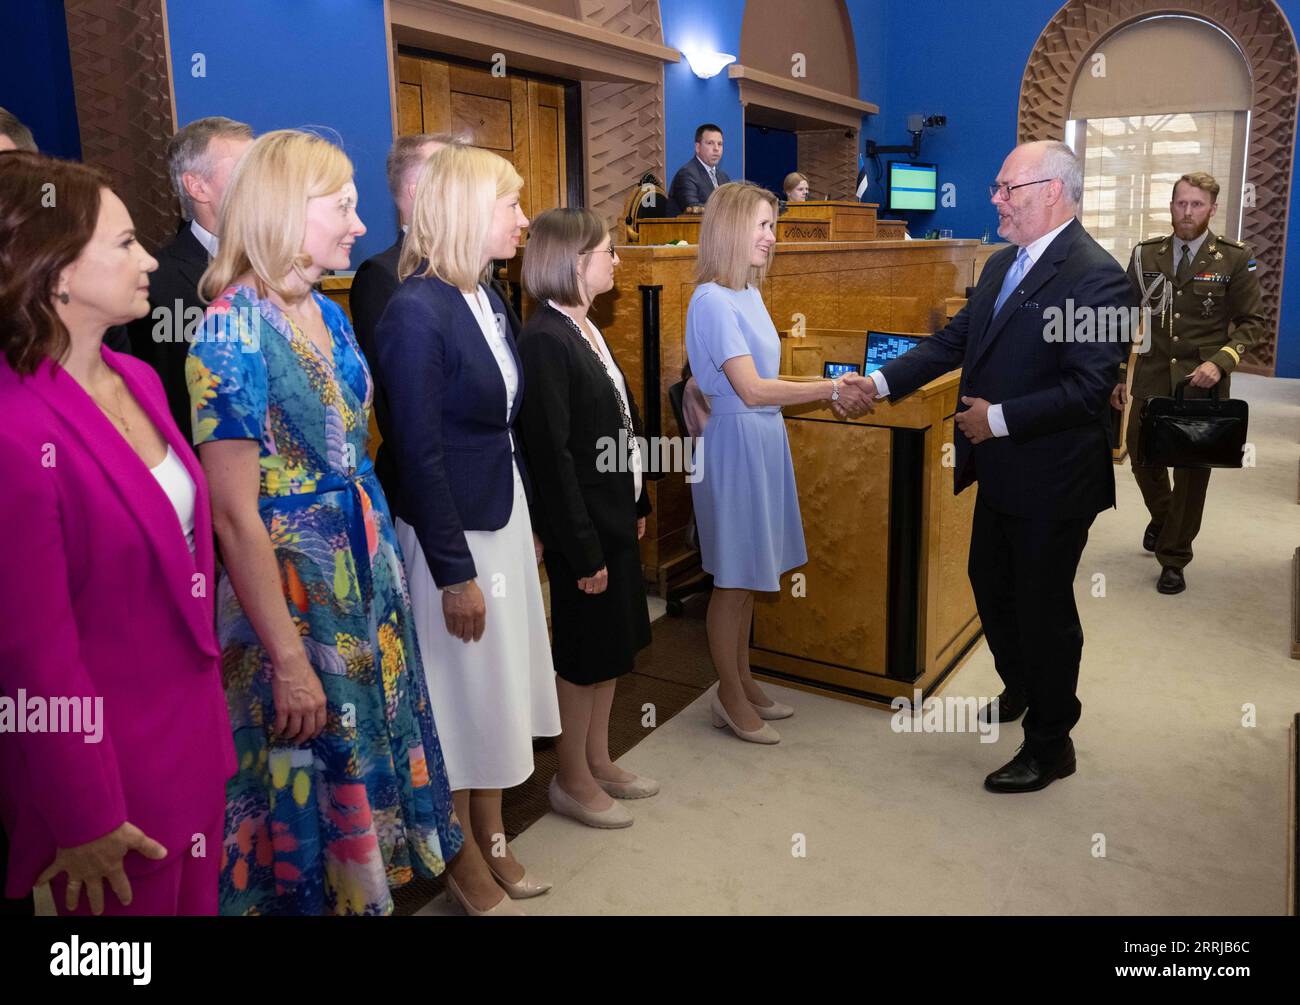 220719 -- TALLINN, July 19, 2022 -- Estonian President Alar Karis 2nd R shakes hands with Estonian Prime Minister and Reform Party Chairwoman Kaja Kallas 3rd R to congratulate on the new government coalition s taking office in the Estonian Parliament Riigikogu in Tallinn, Estonia, July 18, 2022. The members of Estonia s new government coalition of the Reform Party, the conservative Isamaa Fatherland Party and the Social Democratic Party SDE were sworn in in front of the Parliament Riigikogu on Monday. /Handout via Xinhua ESTONIA-TALLINN-NEW COALITION GOVERNMENT-SWEAR-IN ErikxPeinar/Parliamentx Stock Photo